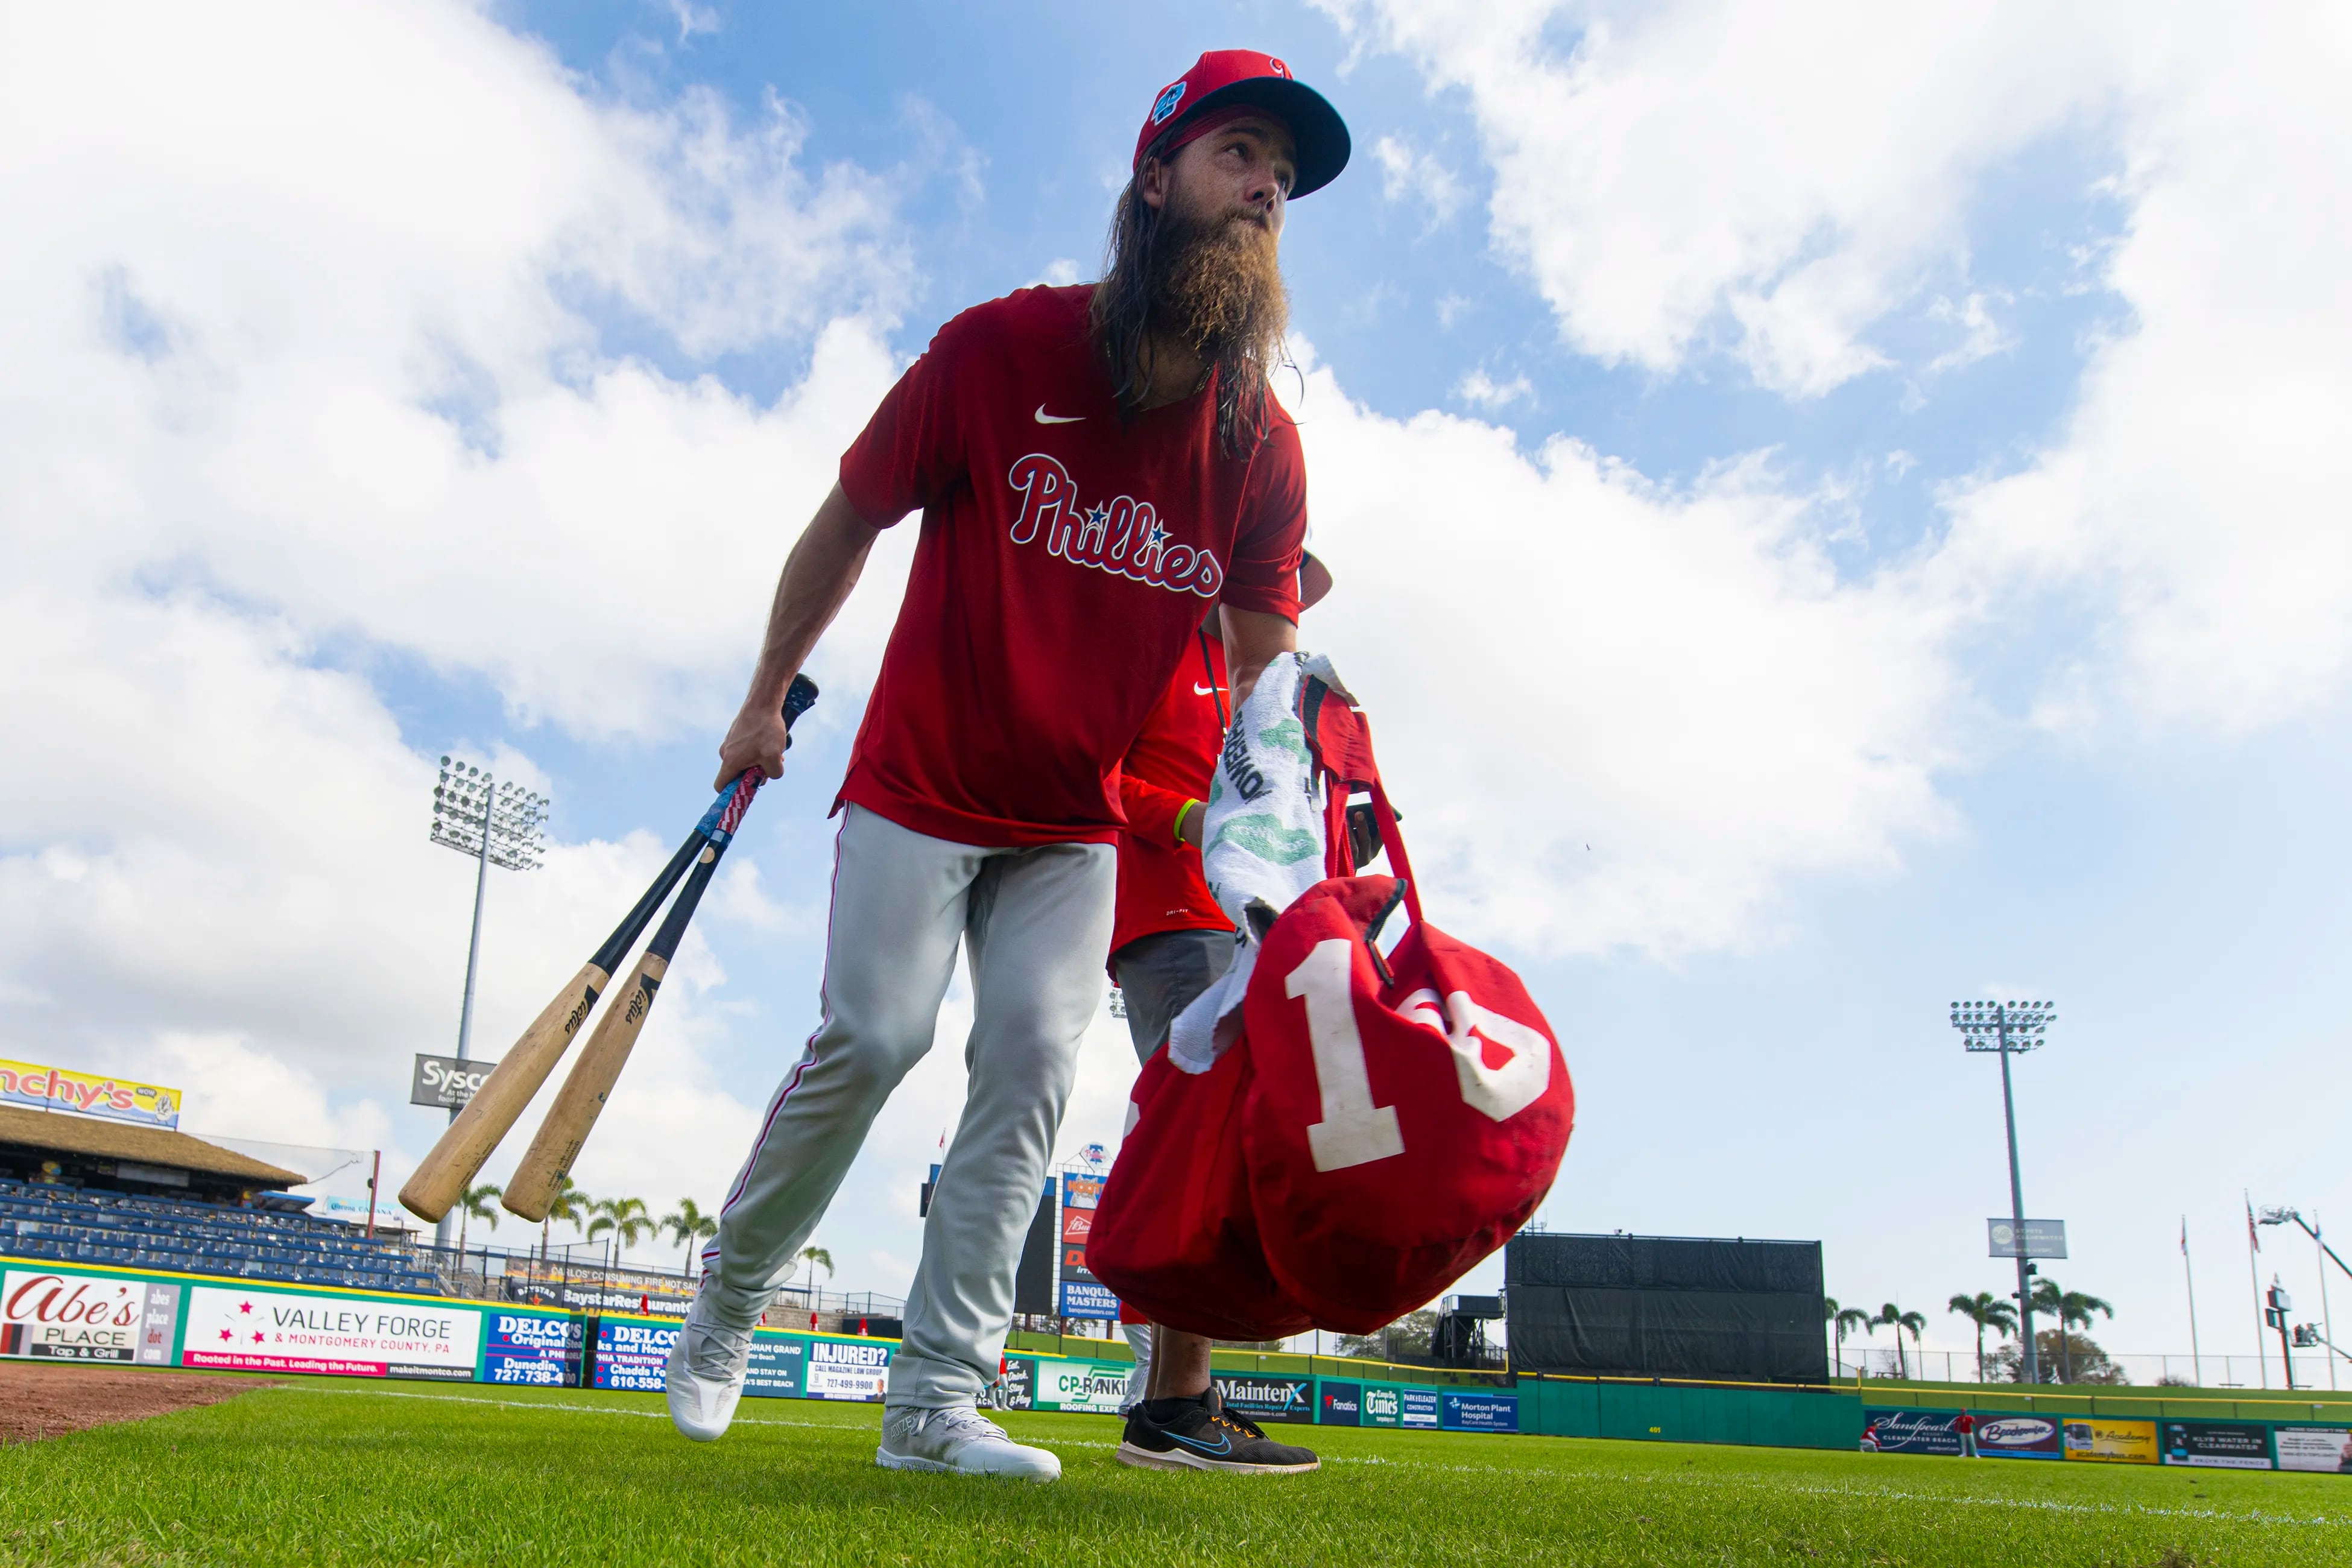 Phillies start their spring training workout in Clearwater